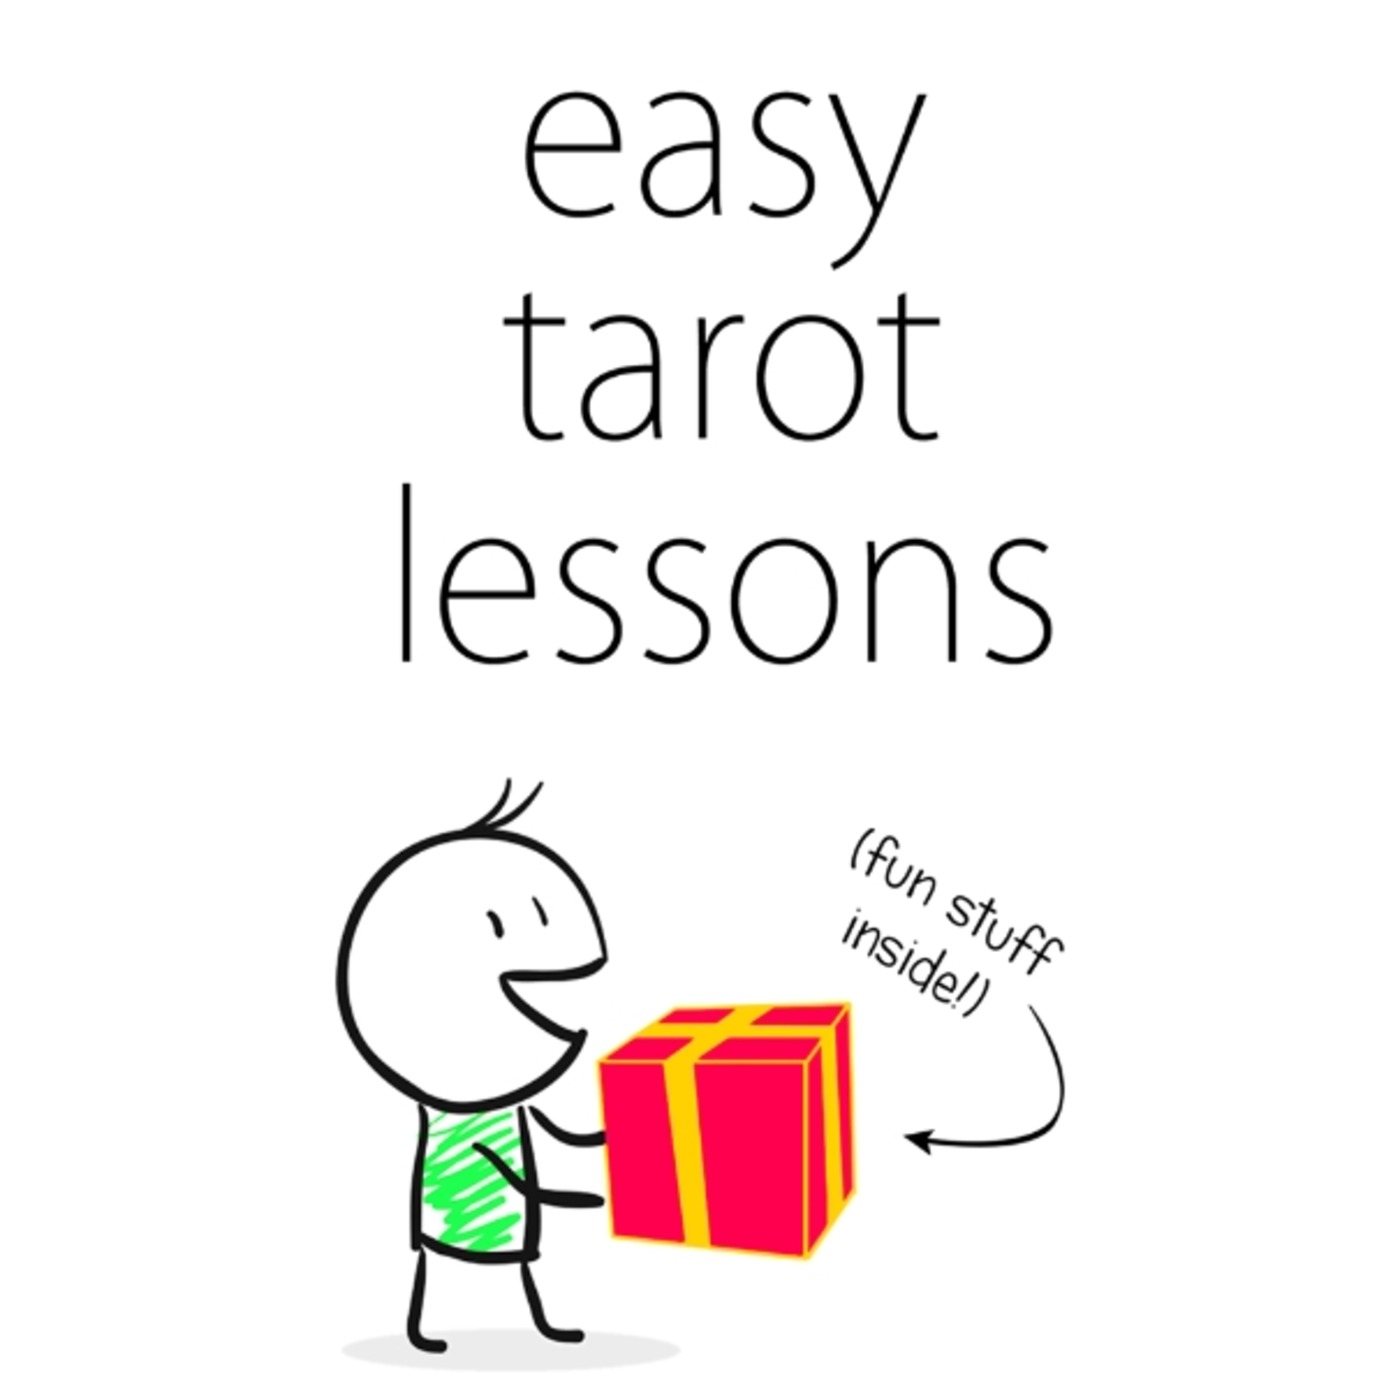 Easy Tarot Lessons! #4 Small group study session 1